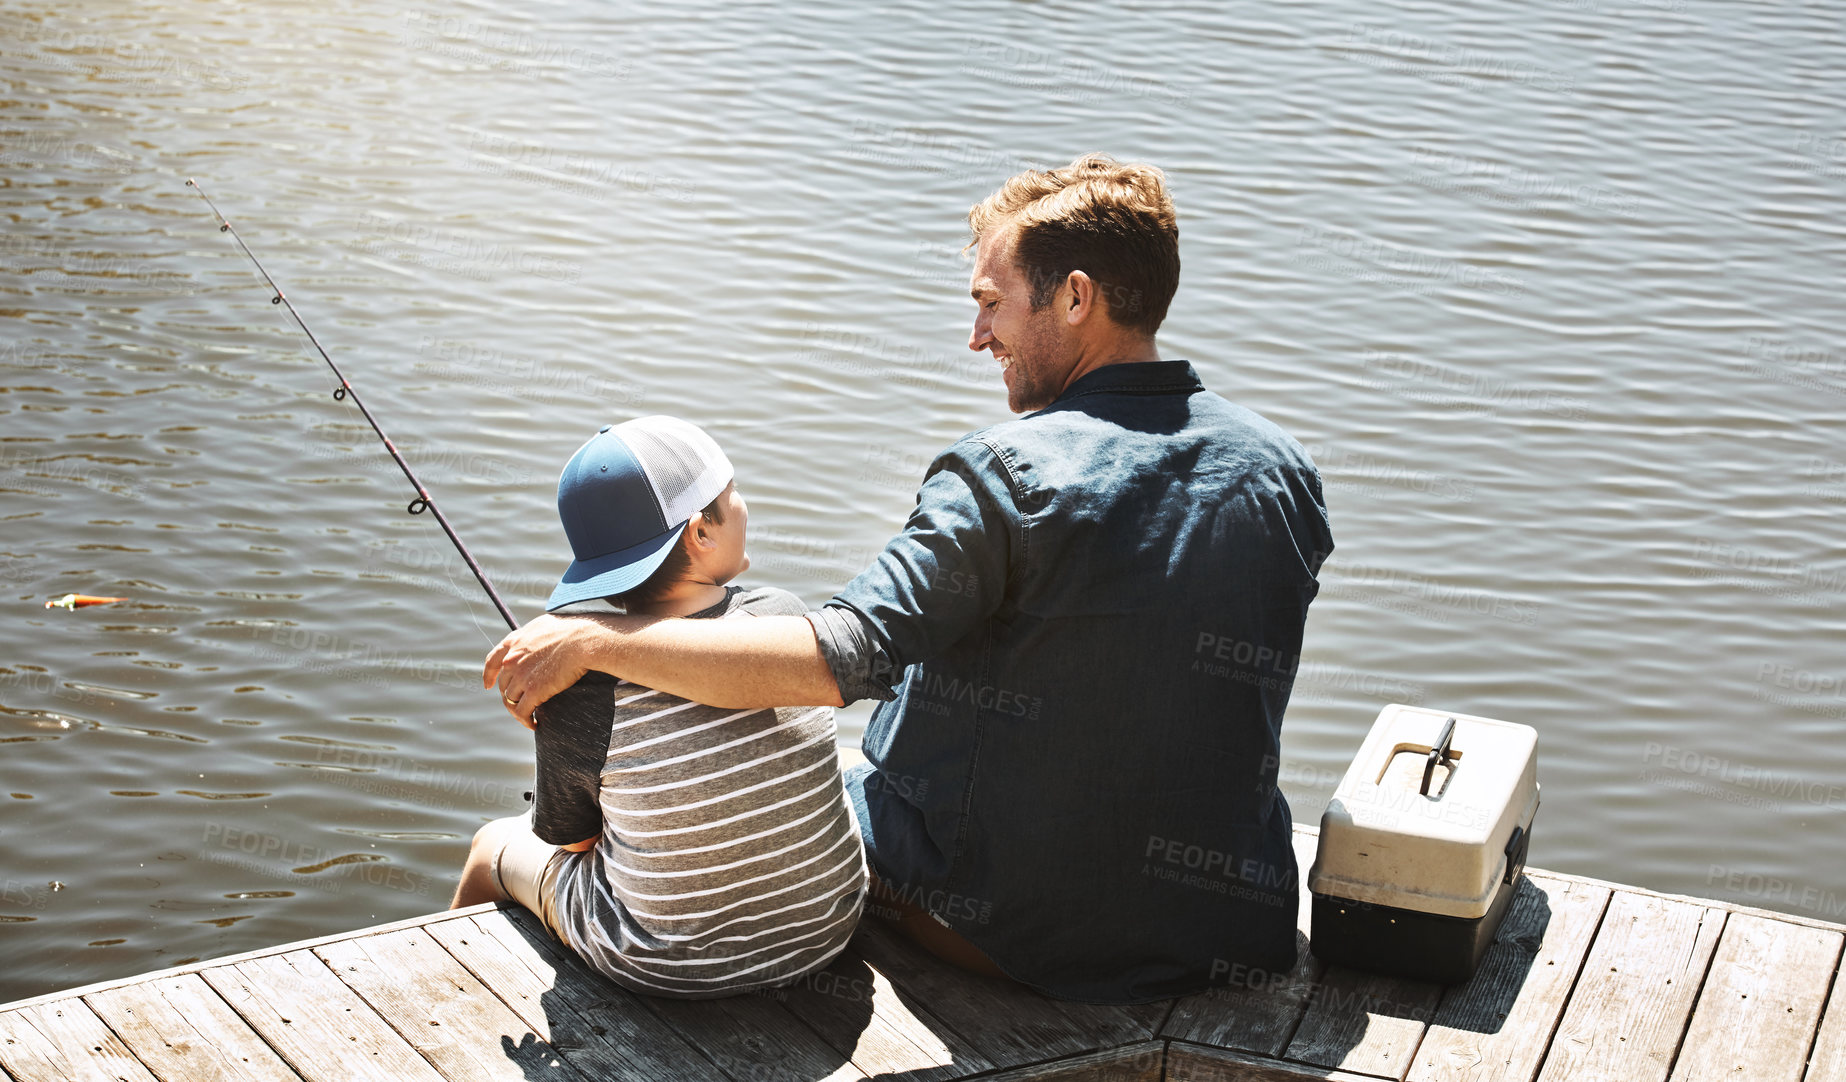 Buy stock photo Happy father, back view and fishing with son or rod by beach, lake or ocean in nature. Dad with child, kid or little boy enjoying bonding, lesson or tips to catch sea creatures with hug by water